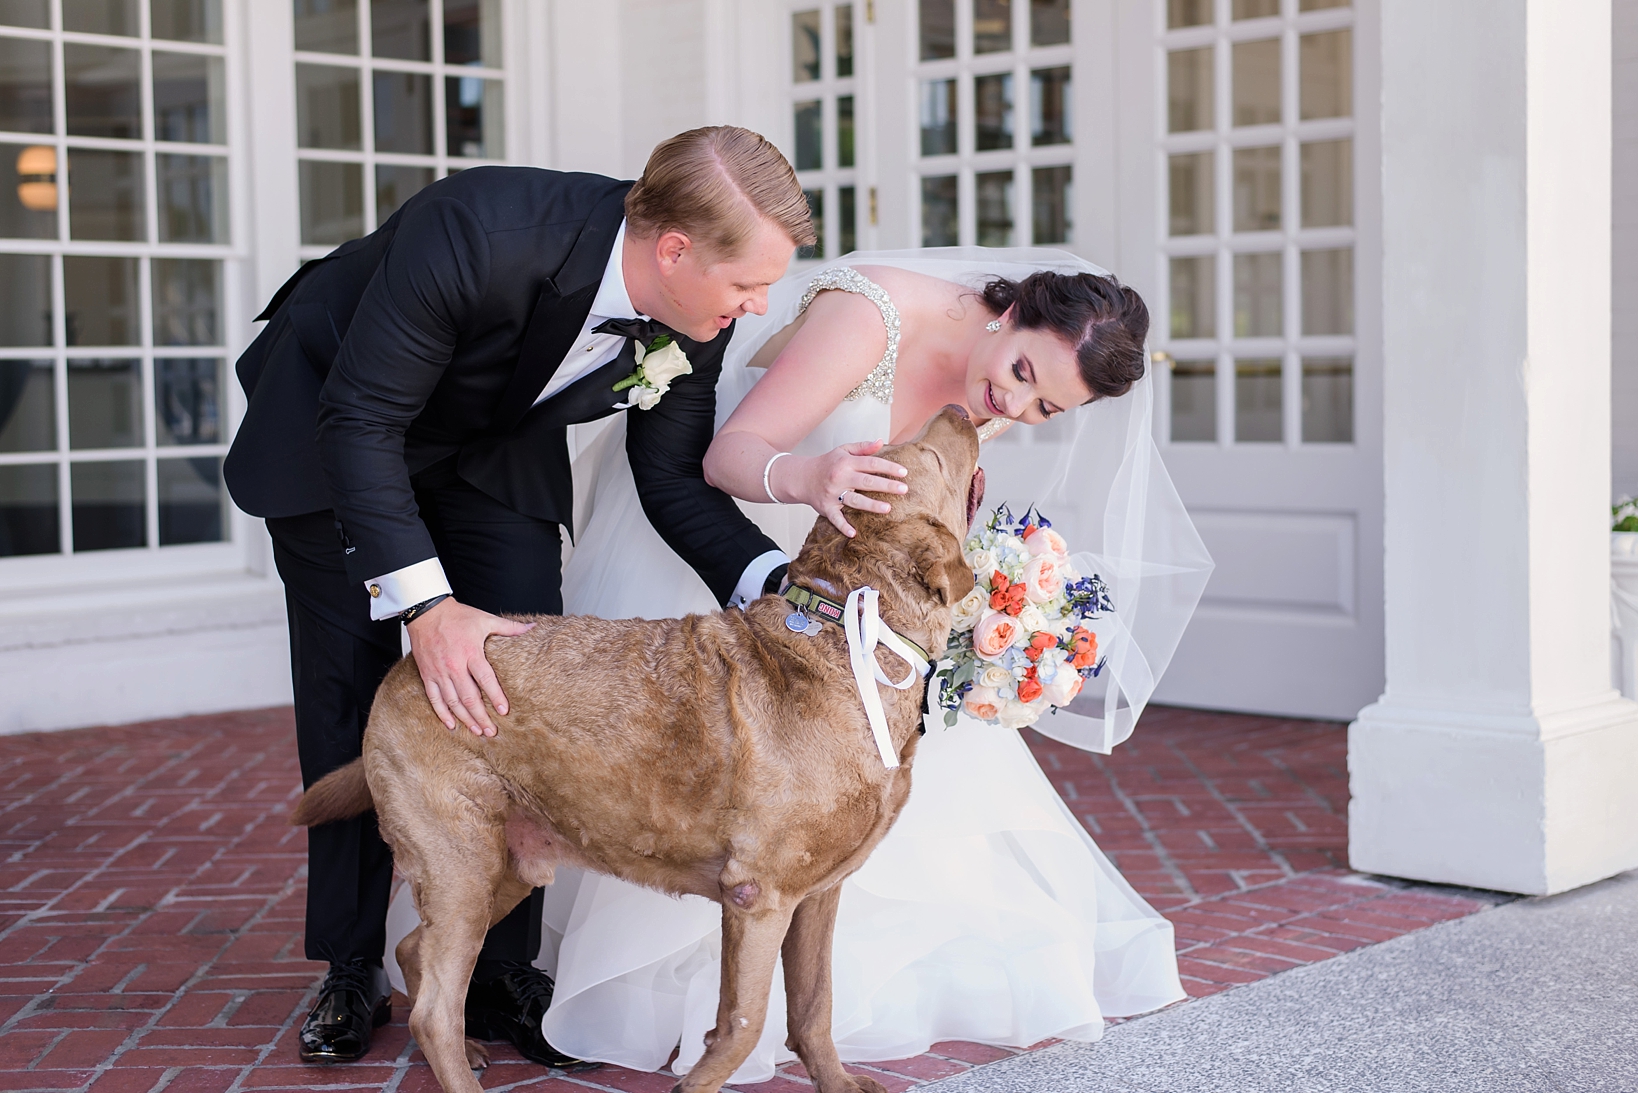 Bride and Groom share a moment with their labrador on their wedding day